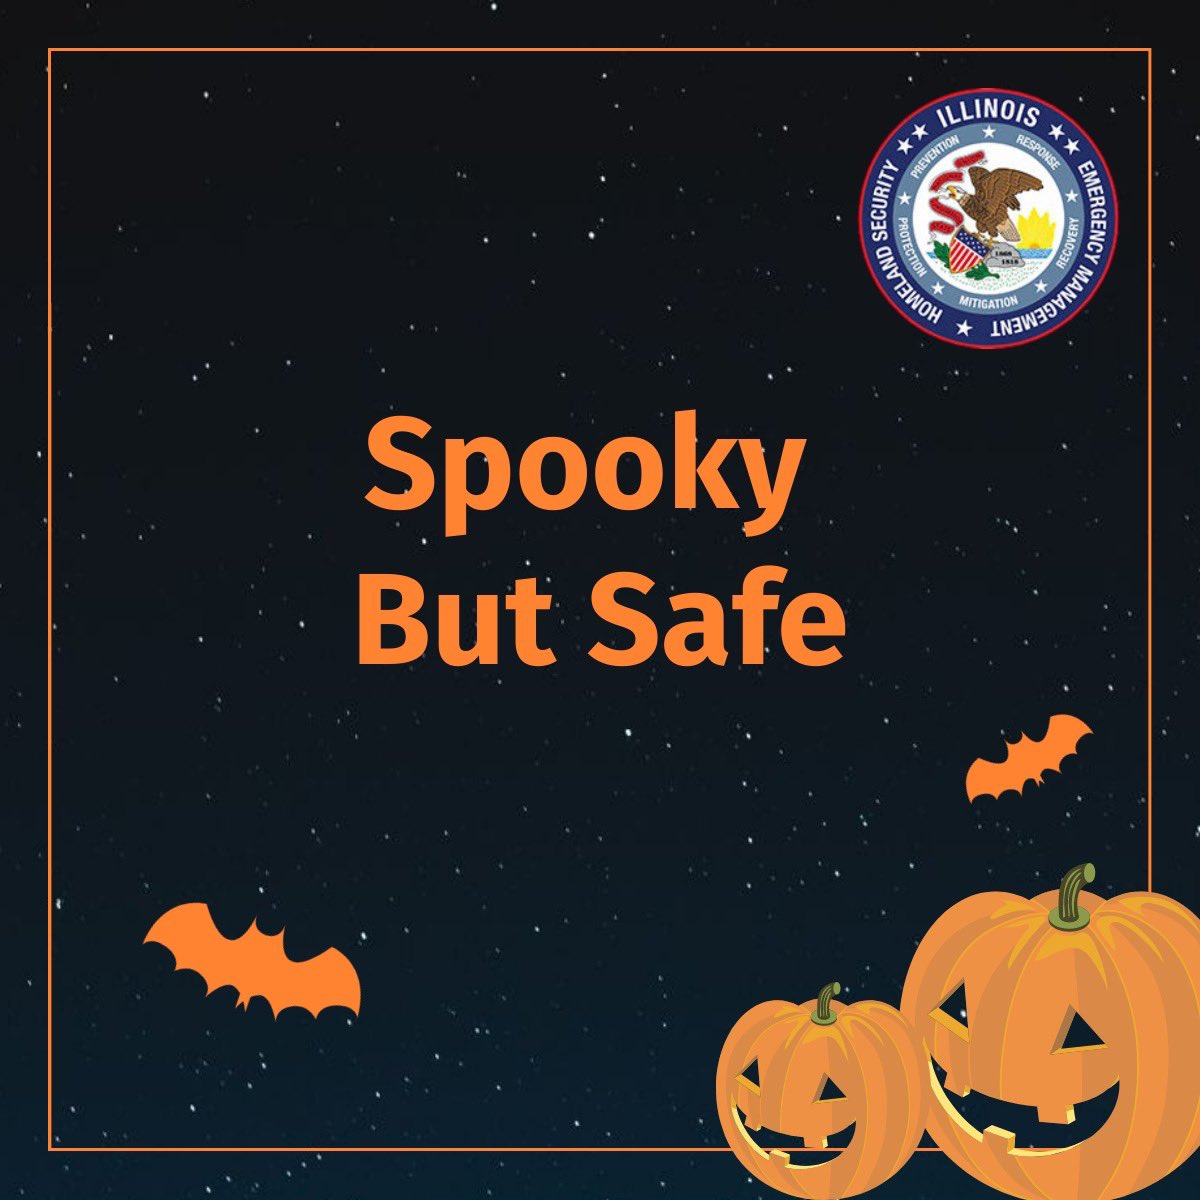 As the spookiest night of the year approaches, let's ensure it's all about fun, not frights!

#HppyHalloween #SpookySeason #TrickorTreat #HalloweenSafety #TrickOrTreatSmart #SafetyFirst #SpookyButSafe #IEMAOHS #HomelandSecurity #StateofIllinois #Illinois